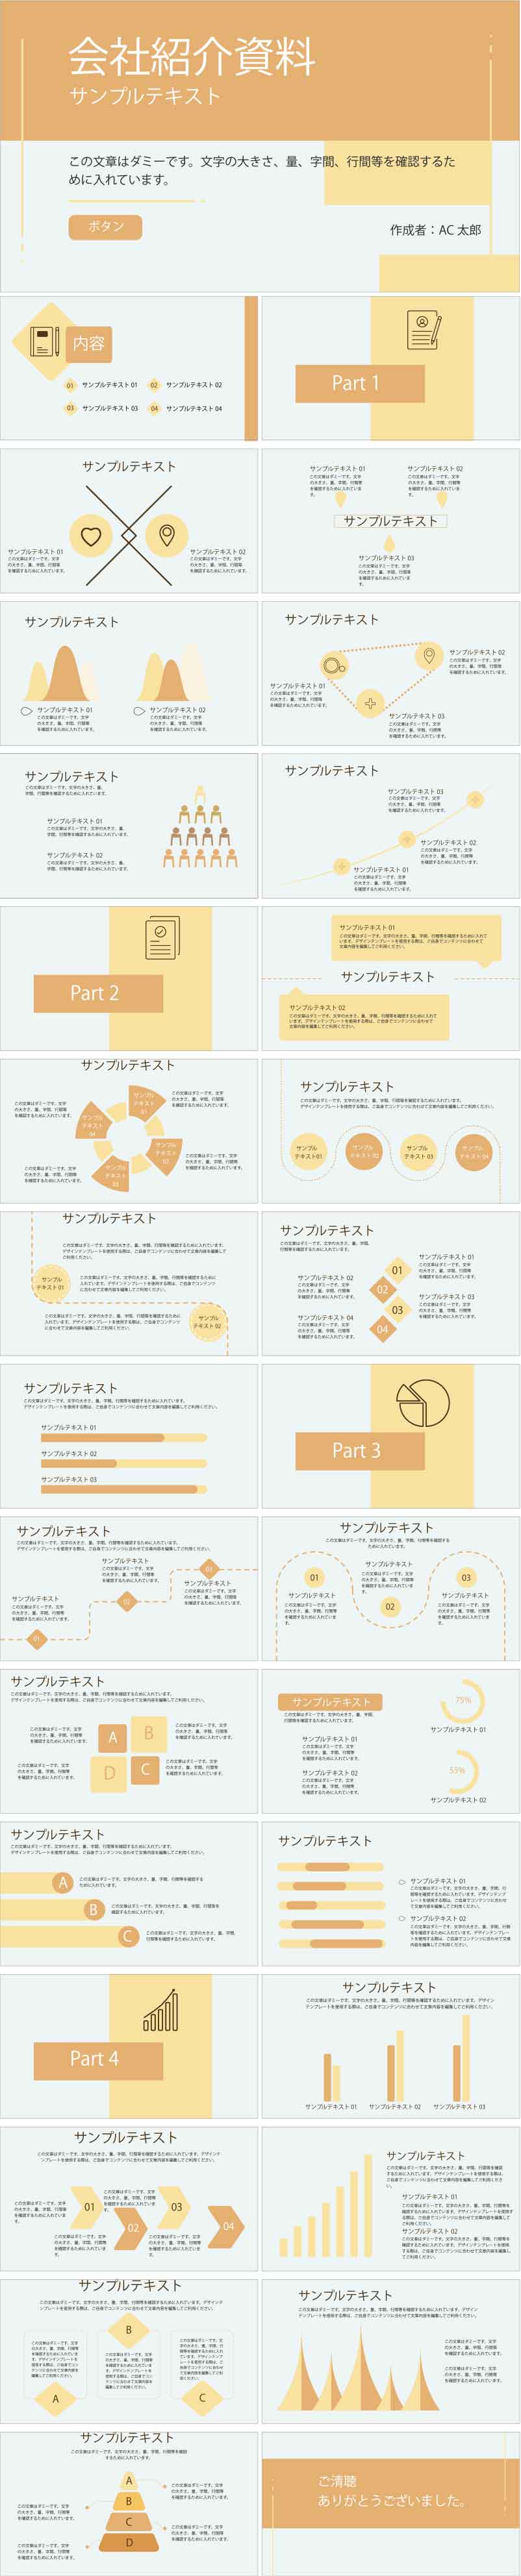 PowerPoint template vol.71